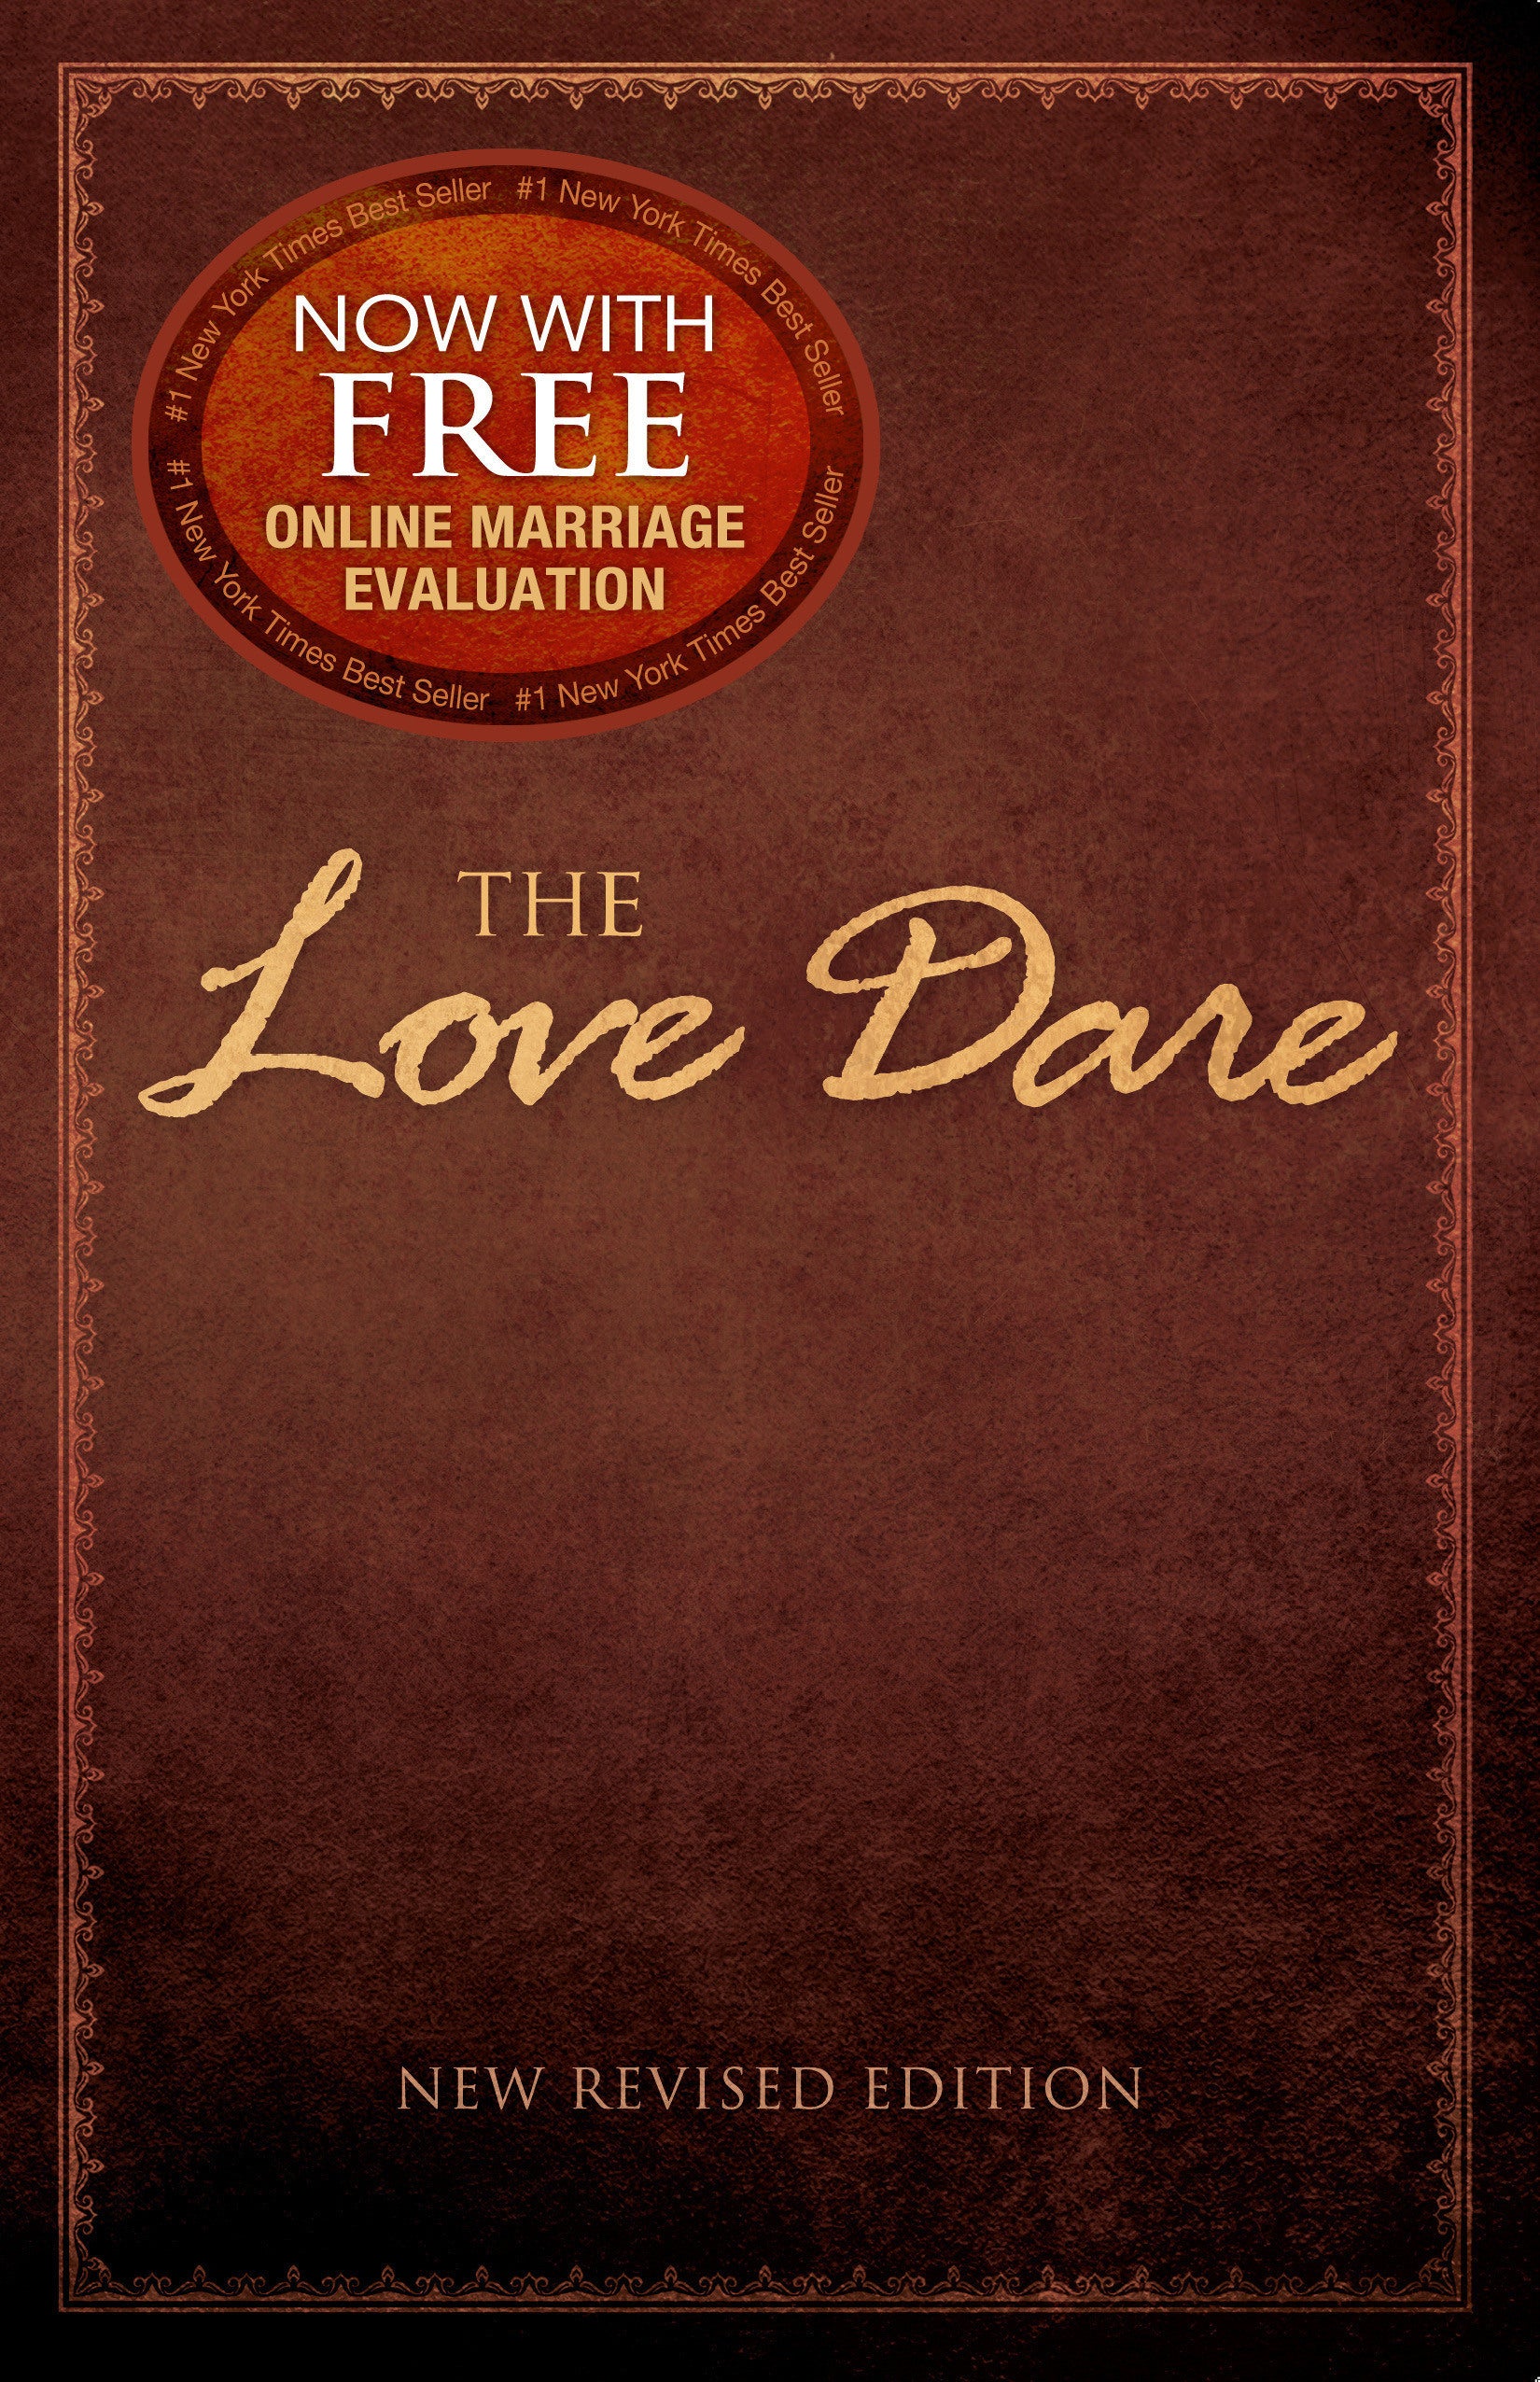 Image of The Love Dare - The Movie Edition other